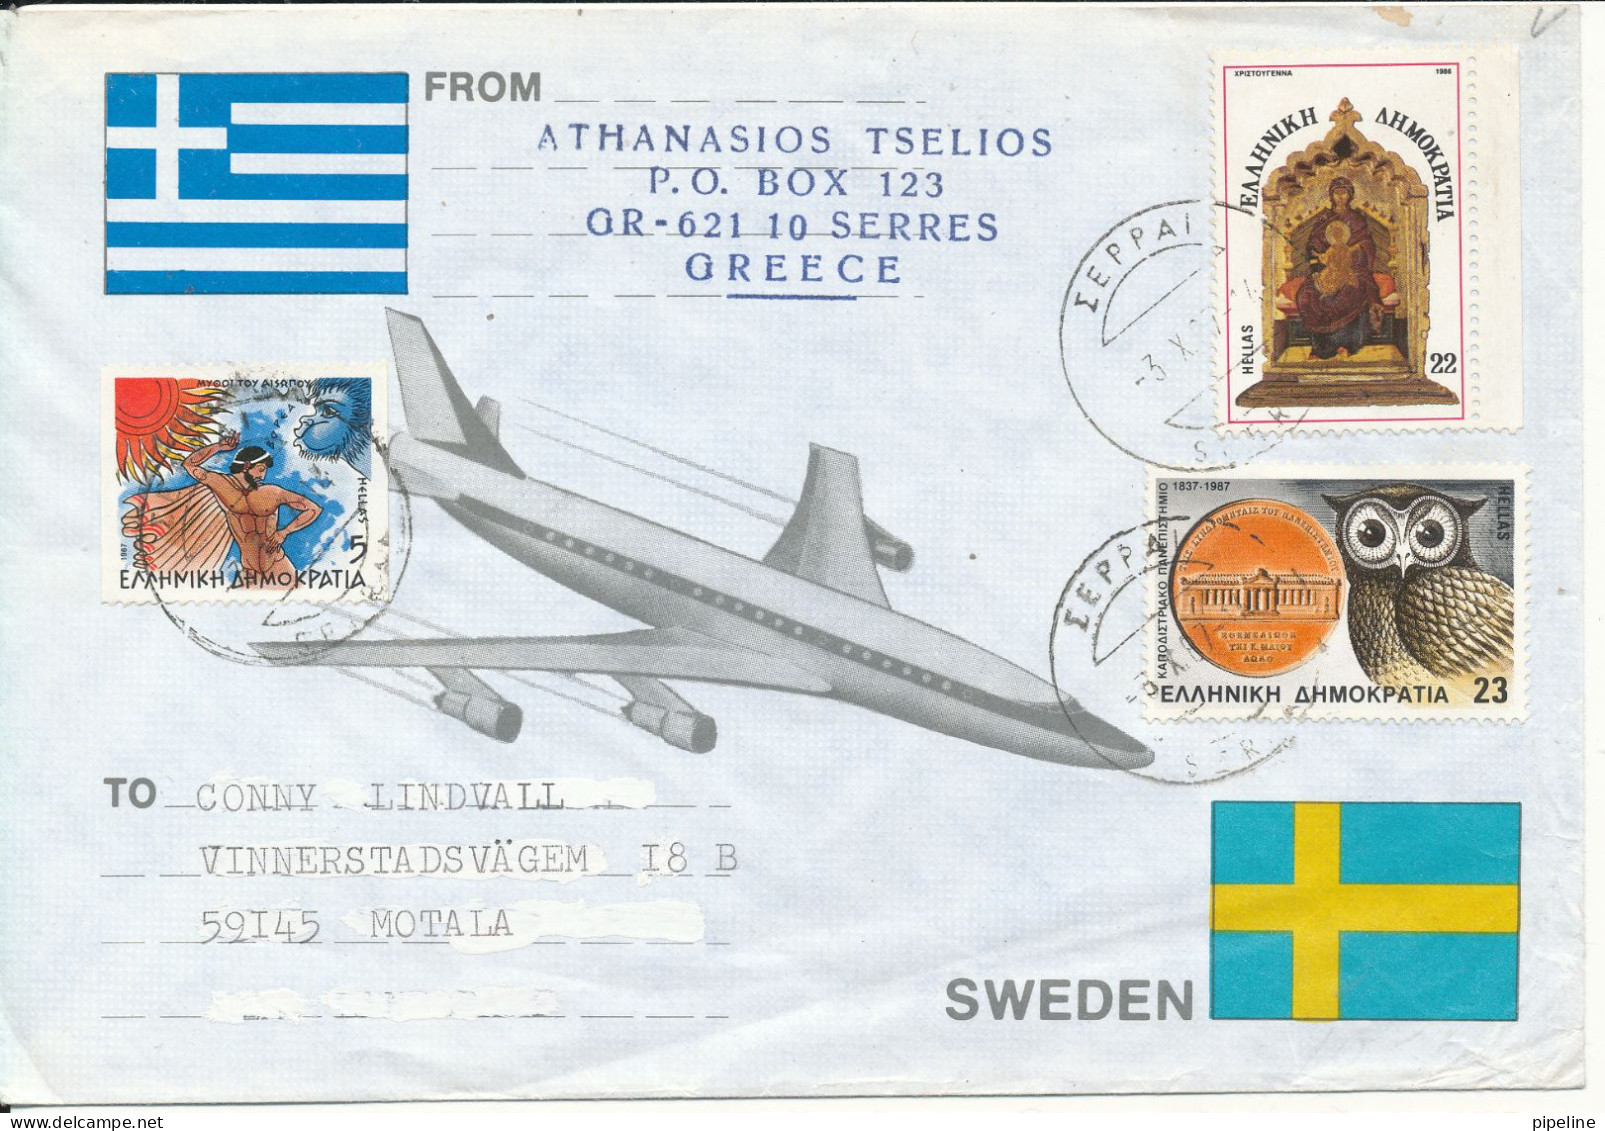 Greece Air Mail Cover Sent To Sweden 3-10-1987 See The BASKETBALL Label On The Backside Of The Cover - Mont Athos